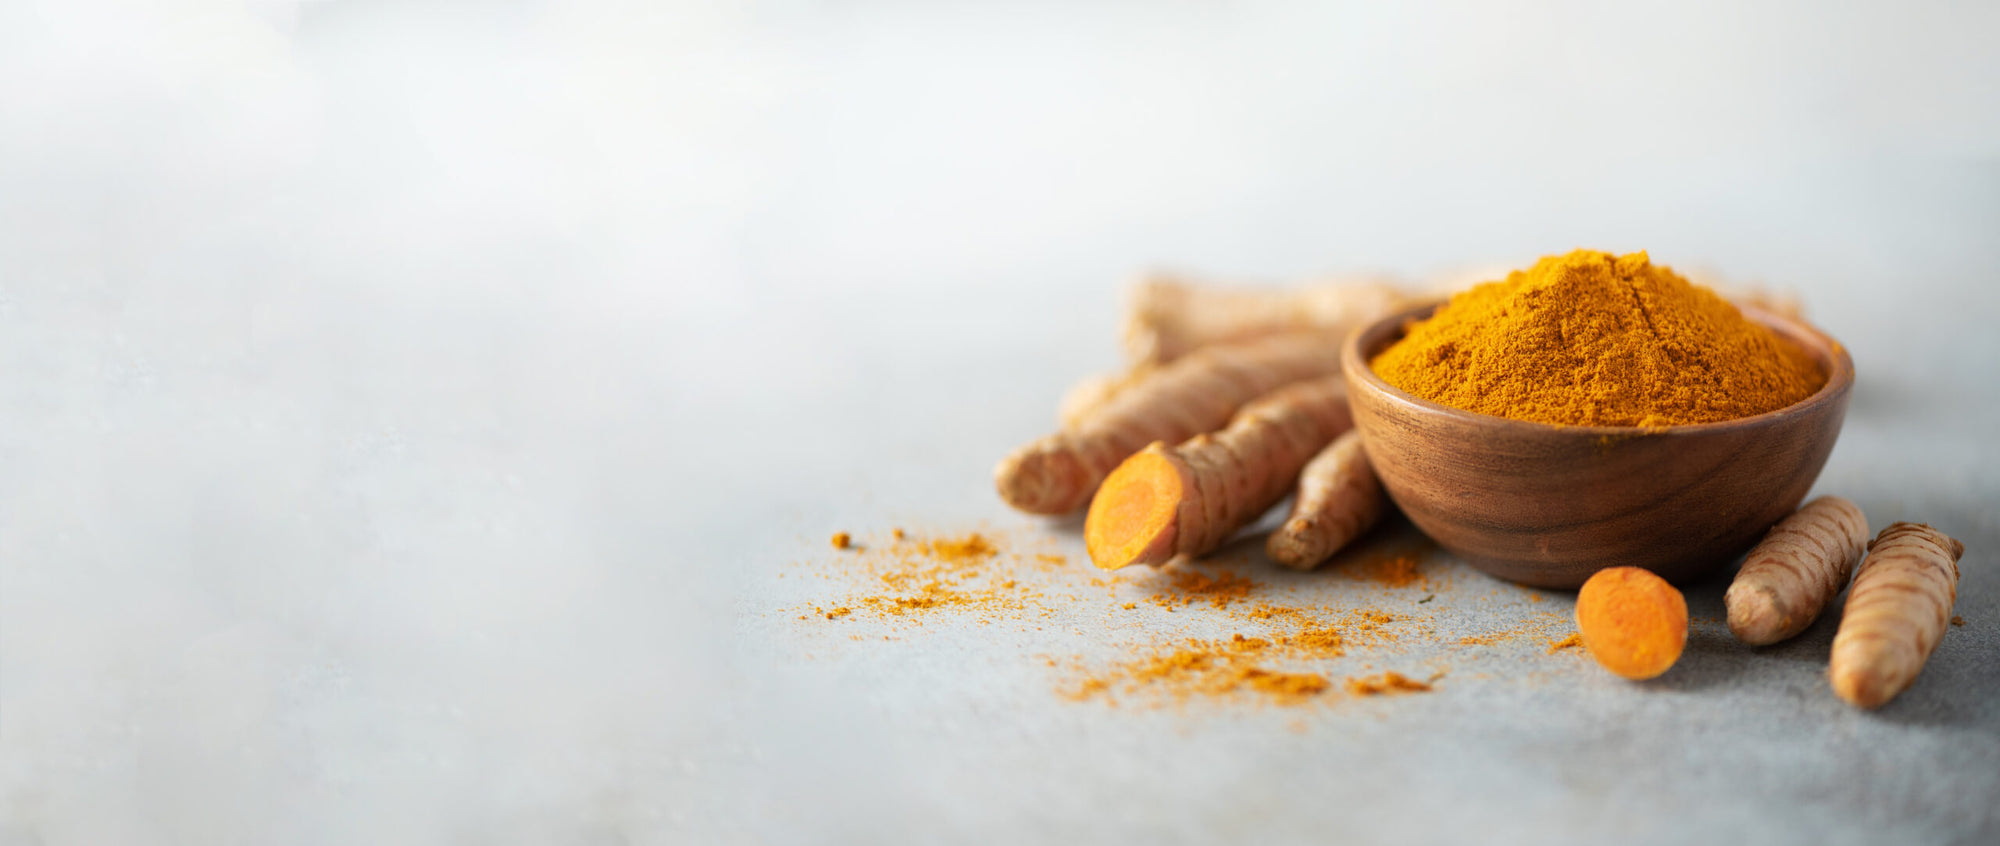 Turmeric extract : what are the benefits?